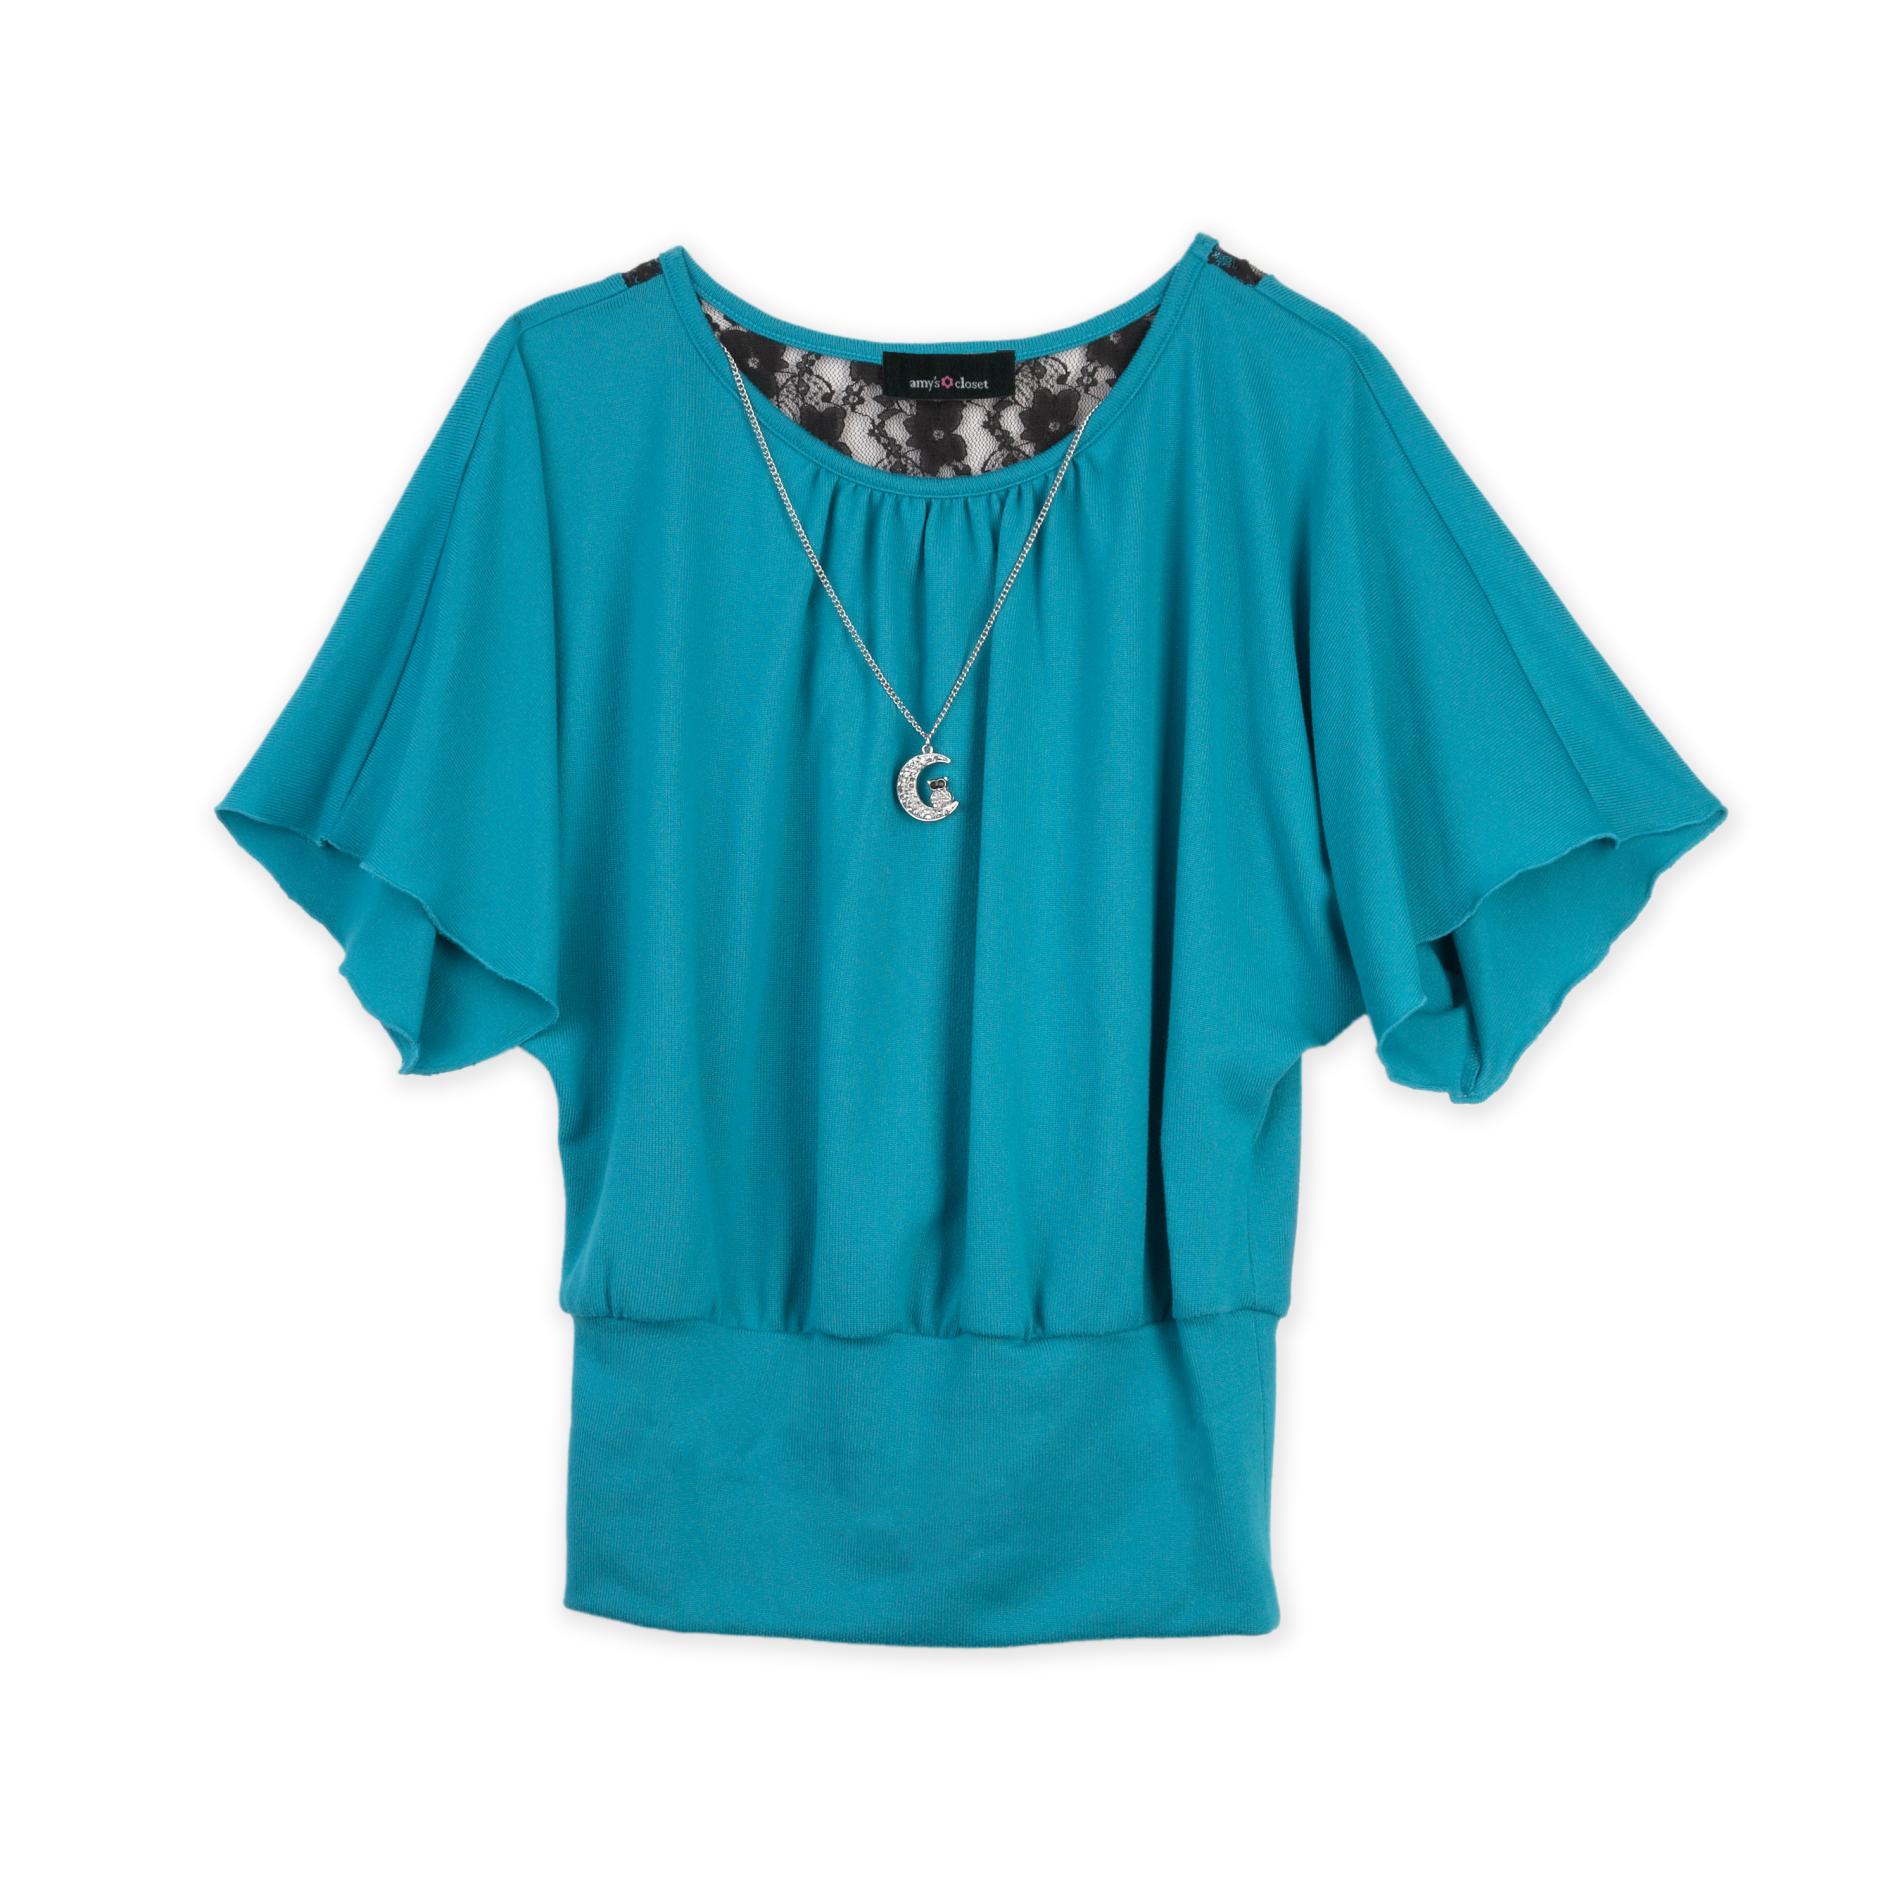 Amy's Closet Girl's Lace-Trimmed Top & Pendant